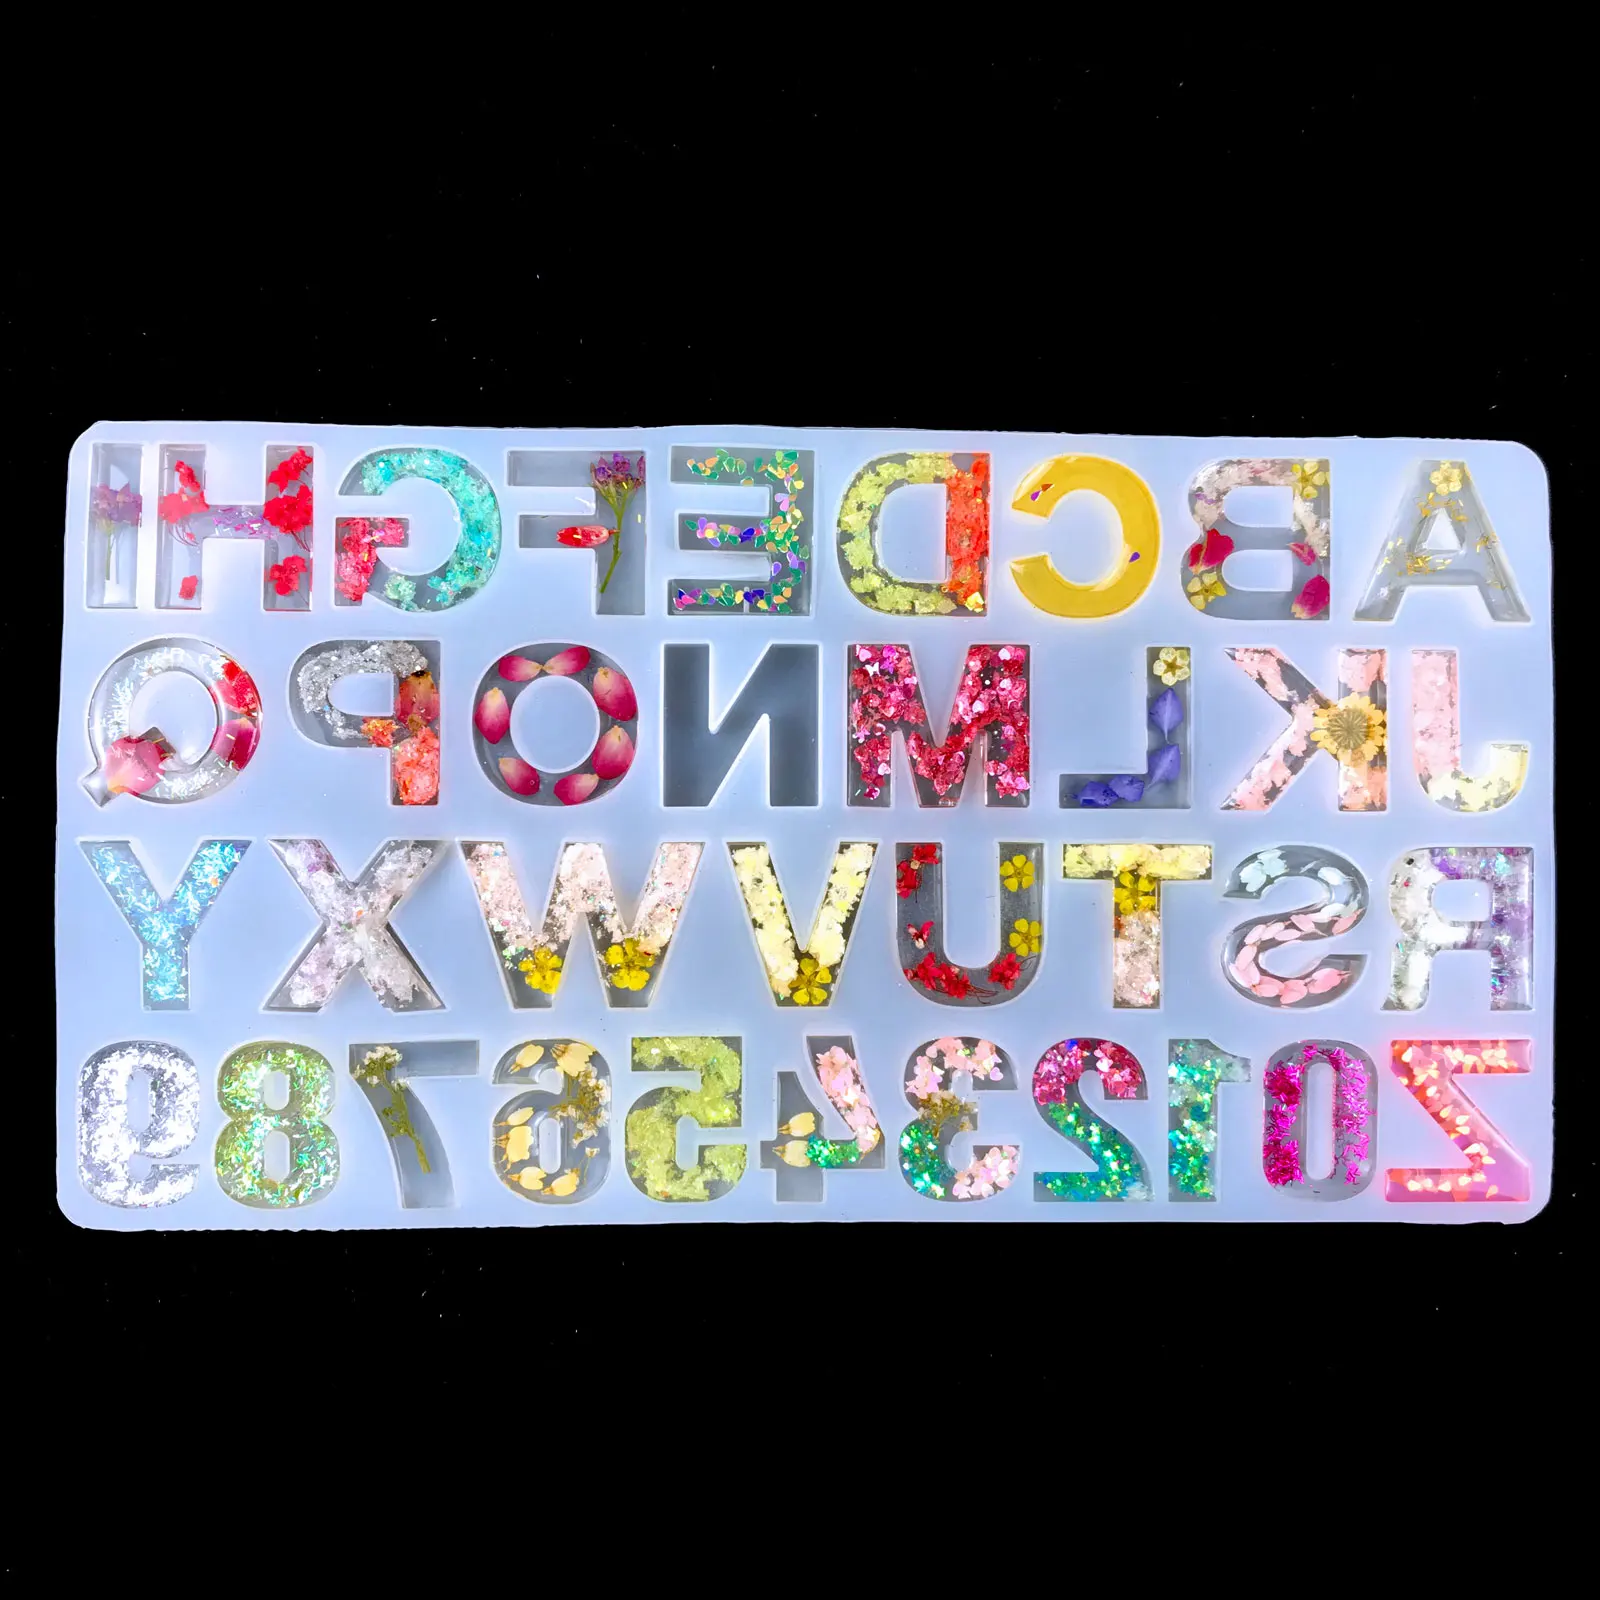 6062 reverse letter mold silicone backwards